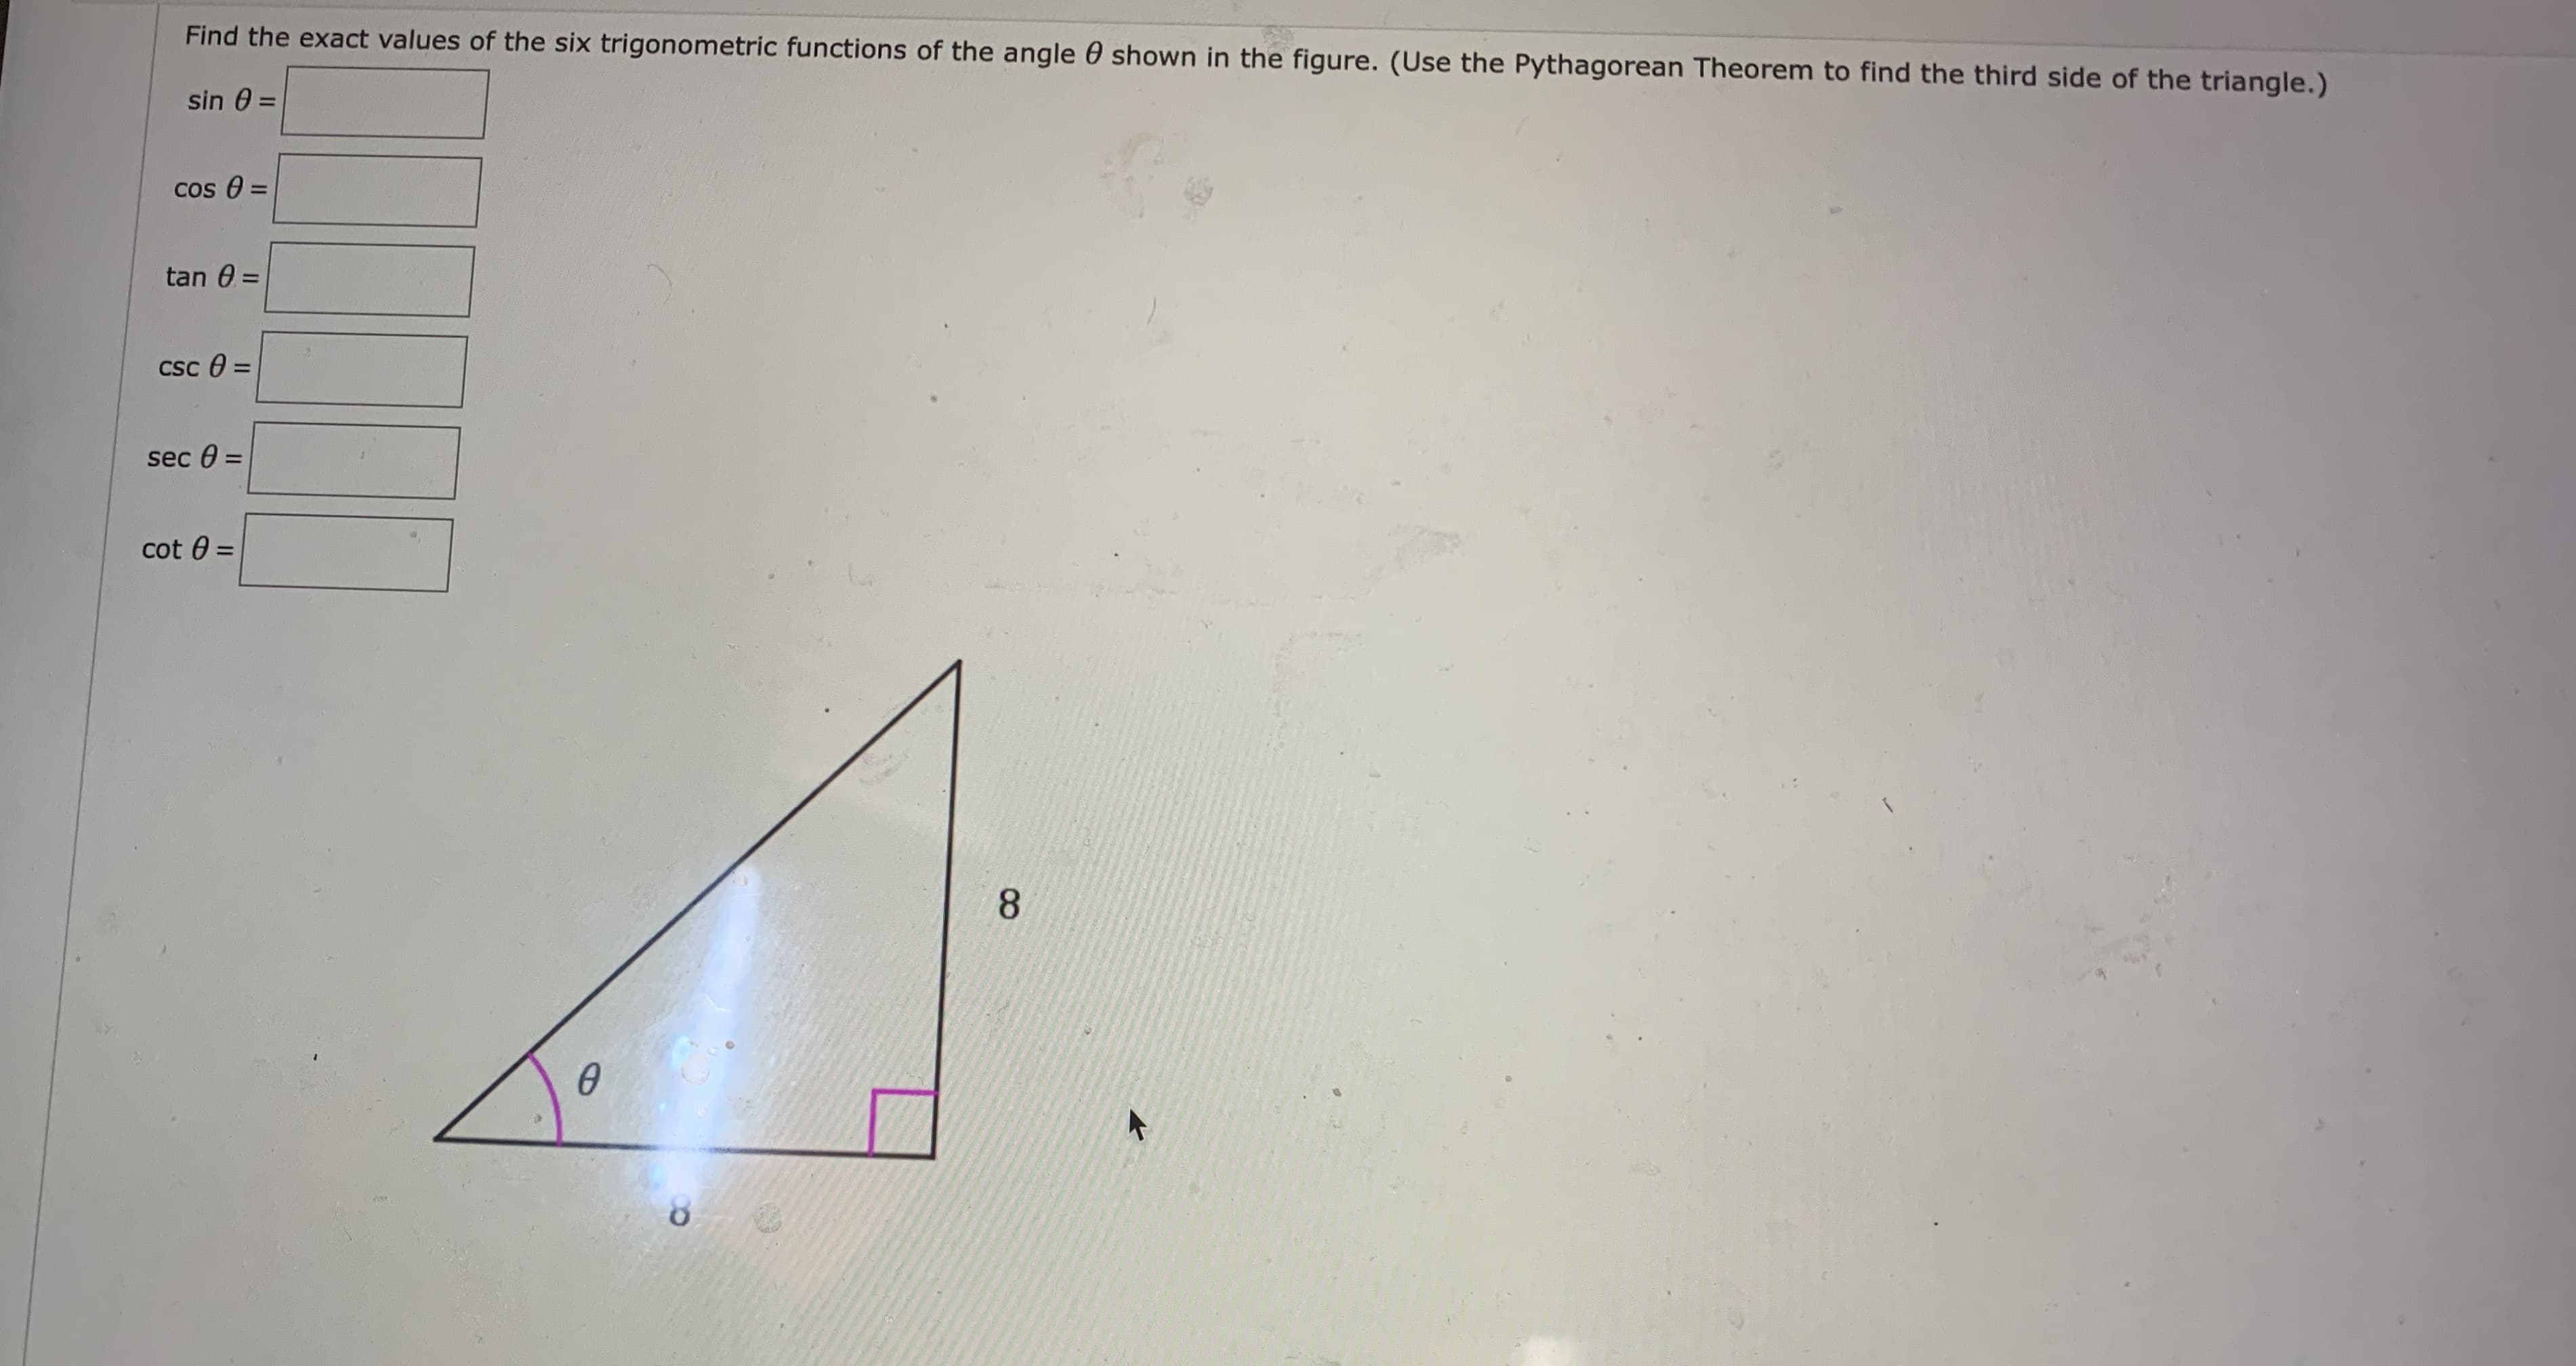 Find the exact values of the six trigonometric functions of the angle 0 shown in the figure. (Use the Pythagorean Theorem to find the third side of the triangle.)
sin 0 =
%3D
Cos O
%3D
tan 0 =
Csc 0 =
sec 0 =
%3D
cot 0
%3D
